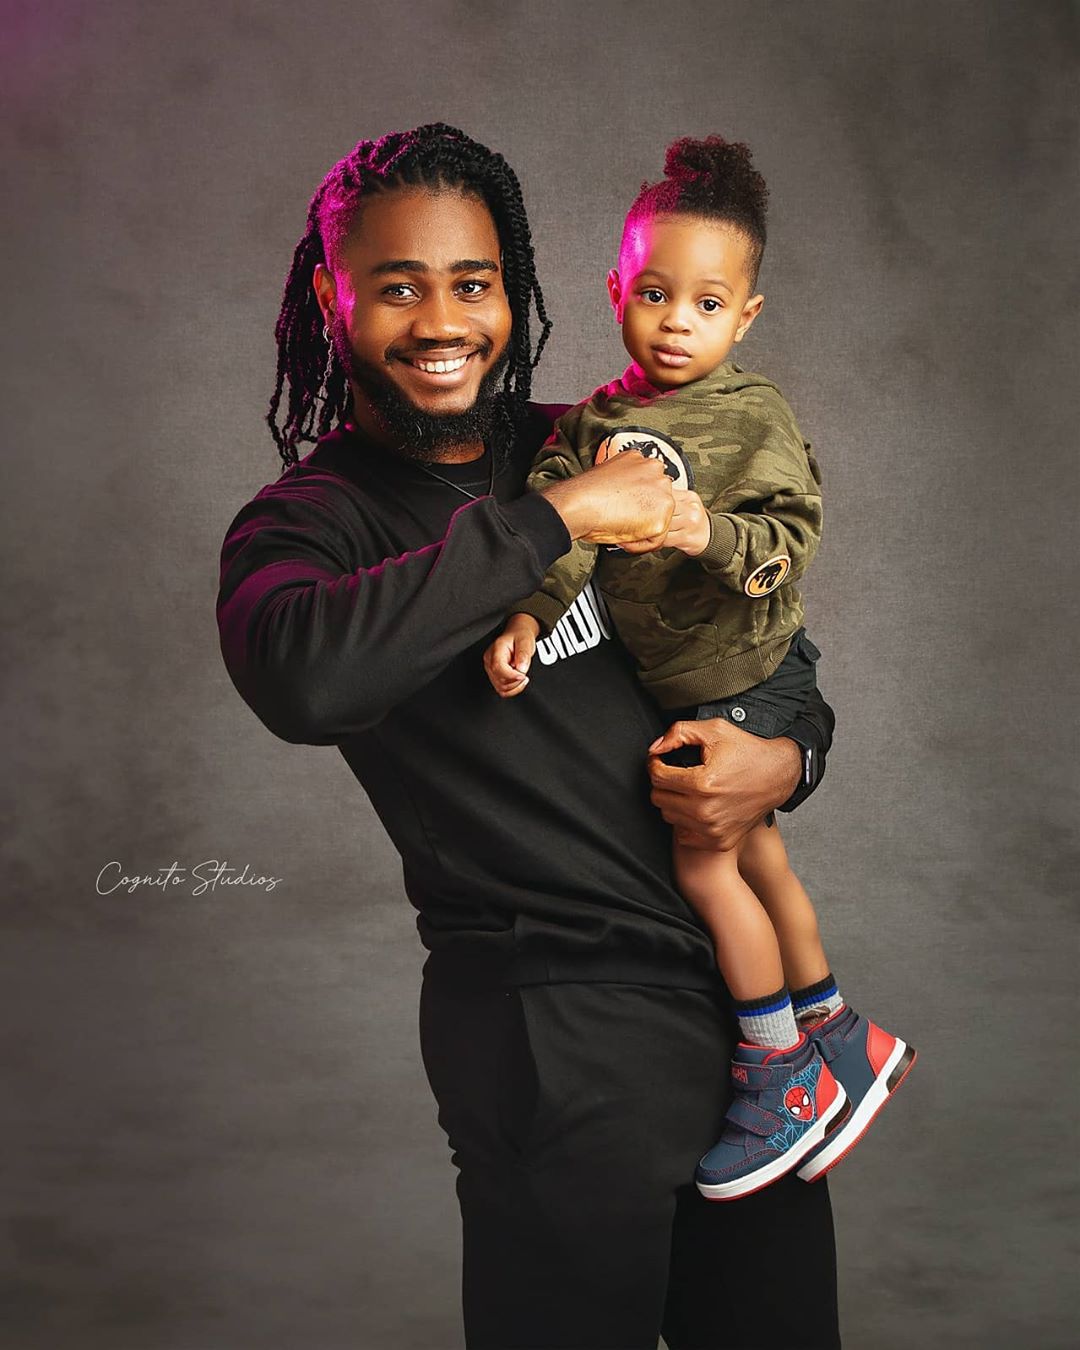 Praise Nelson And Son Looking Amazing In New Pictures 12379598_itzpraise1197892447522037556352452635832983690744221n_jpeg6c0b23a12afbae6ed21f09cec674d262